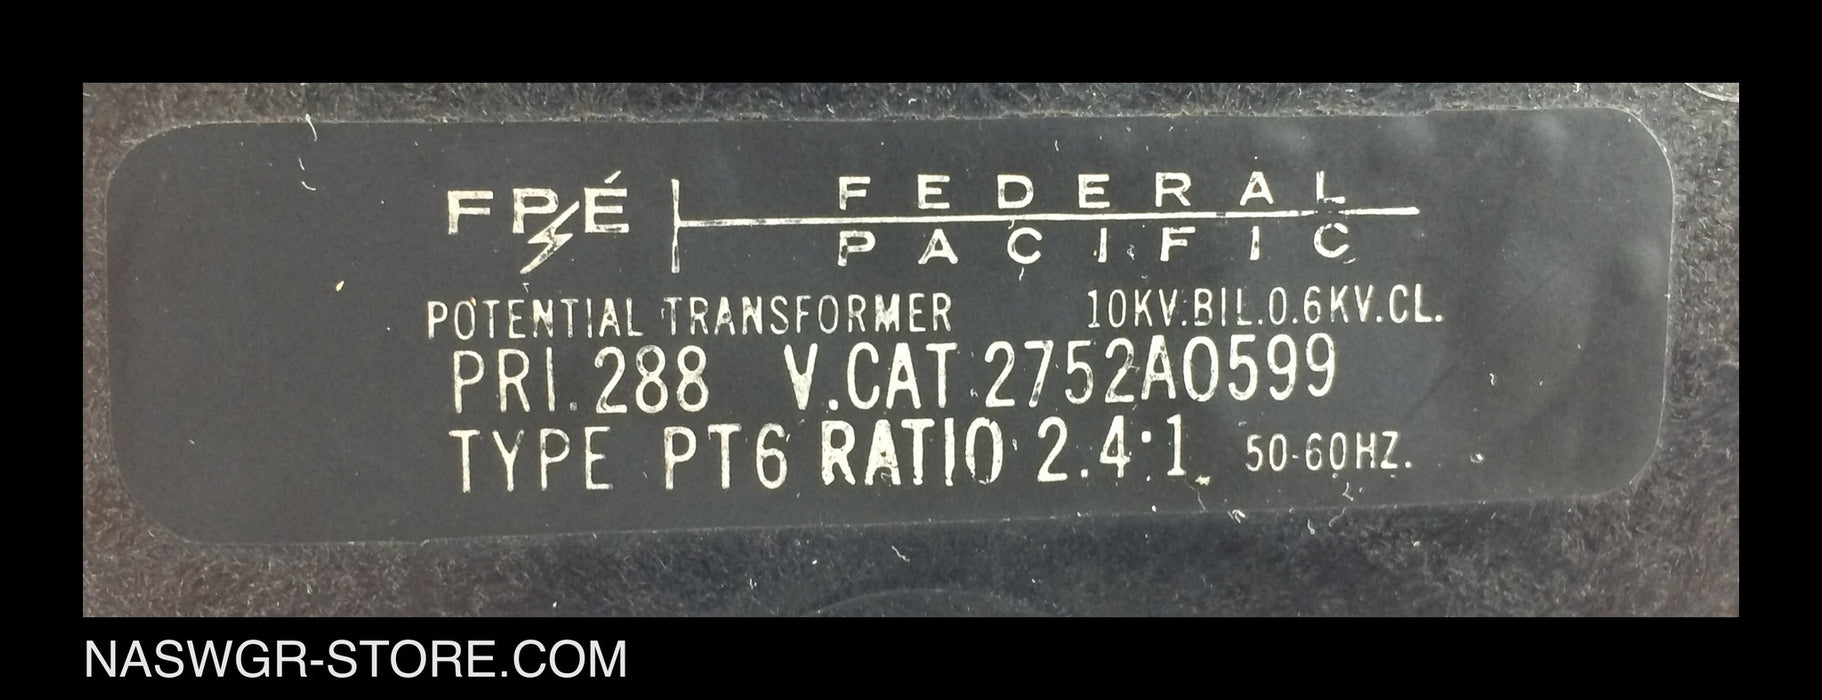 2752A0599 ~ Federal Pacific  2752A0599 Potential Transformer